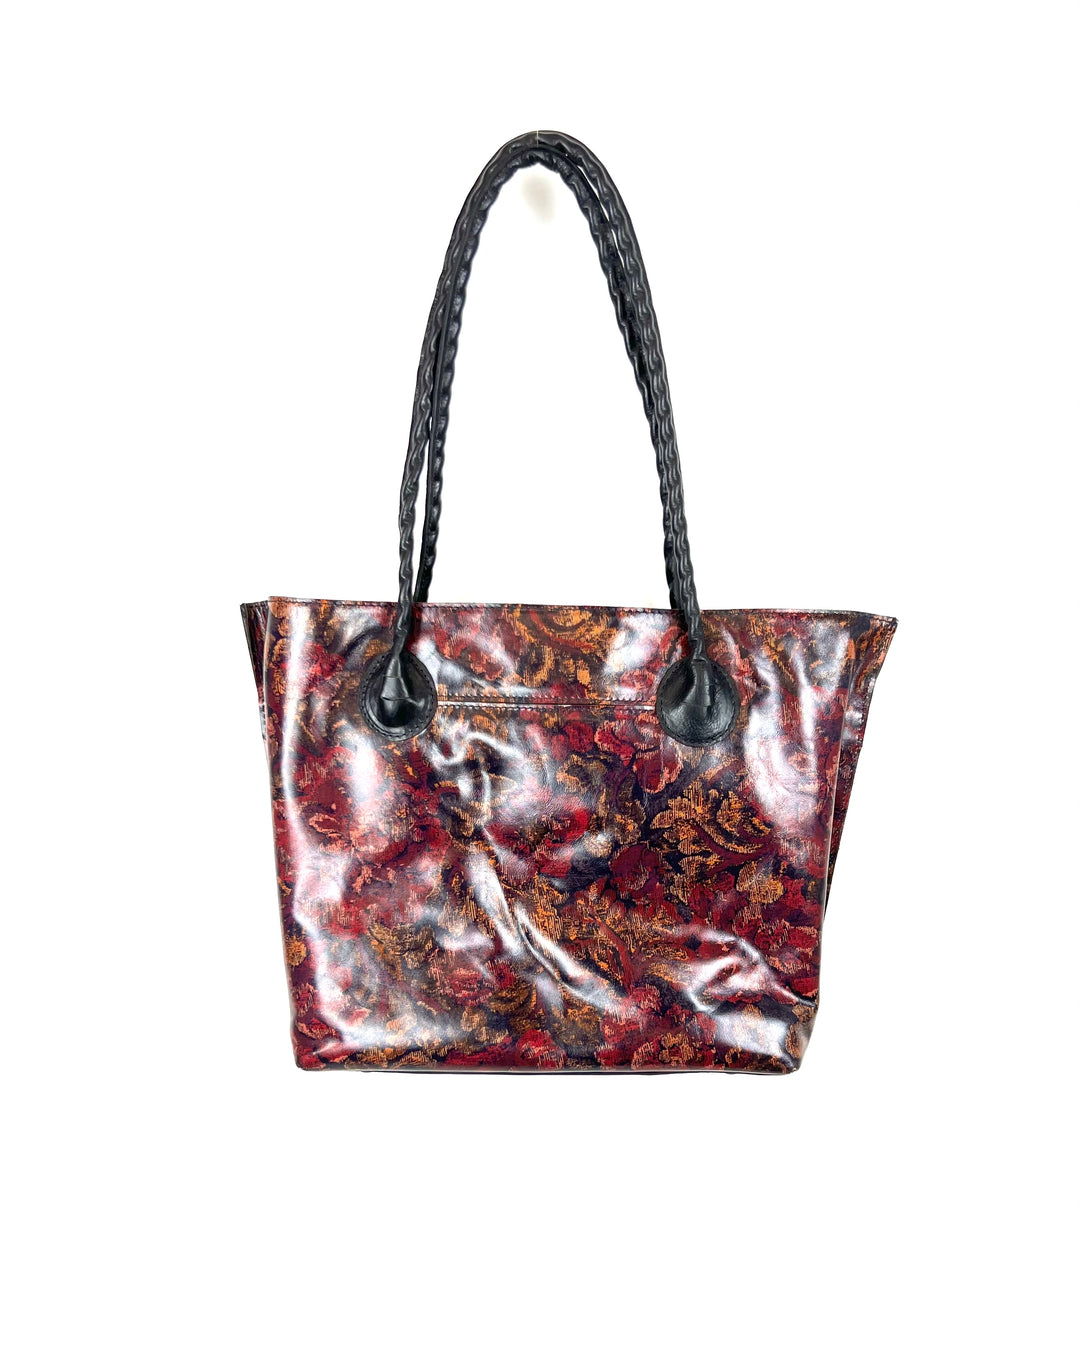 Black and Red Floral Large Leather Tote Bag